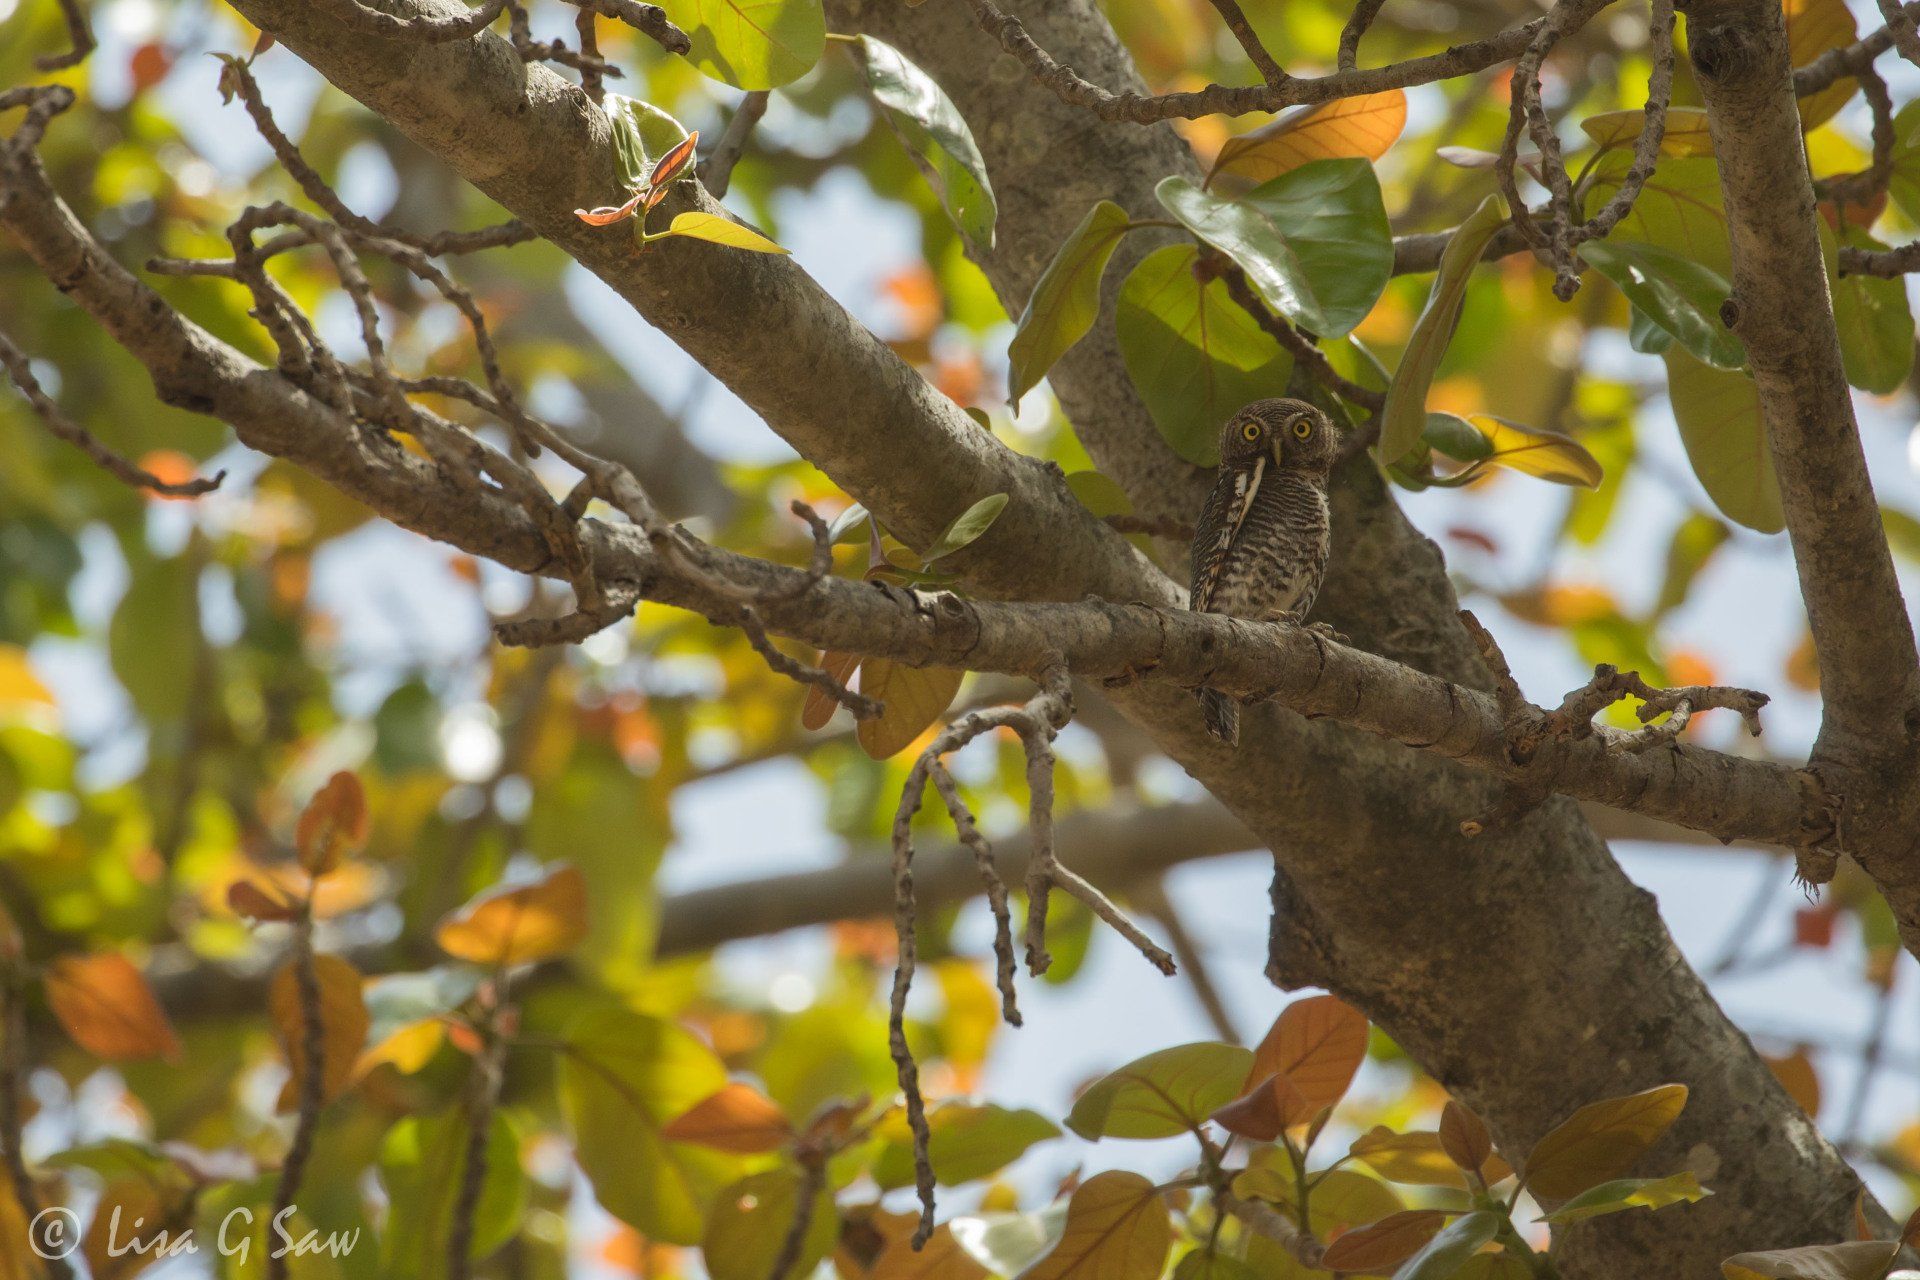 Asian Barred Owlet on branch with autumn leaves in India